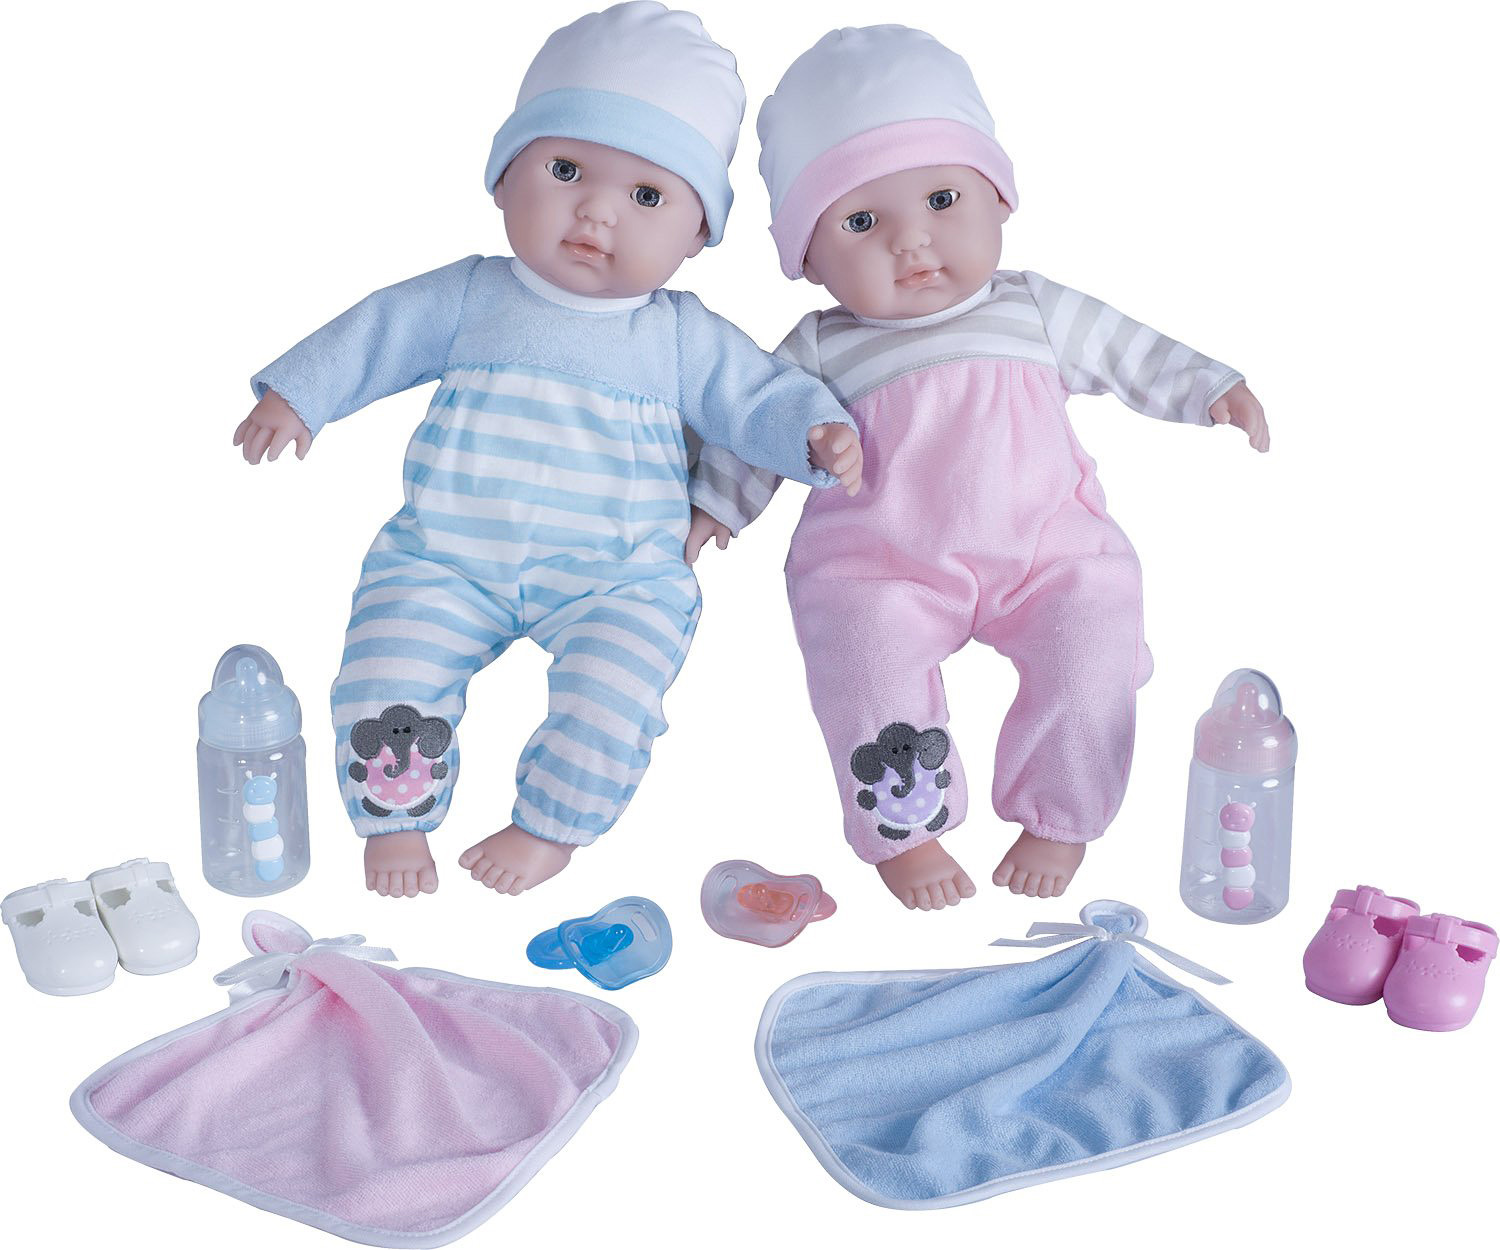 jc toys berenguer boutique 15 soft body baby doll